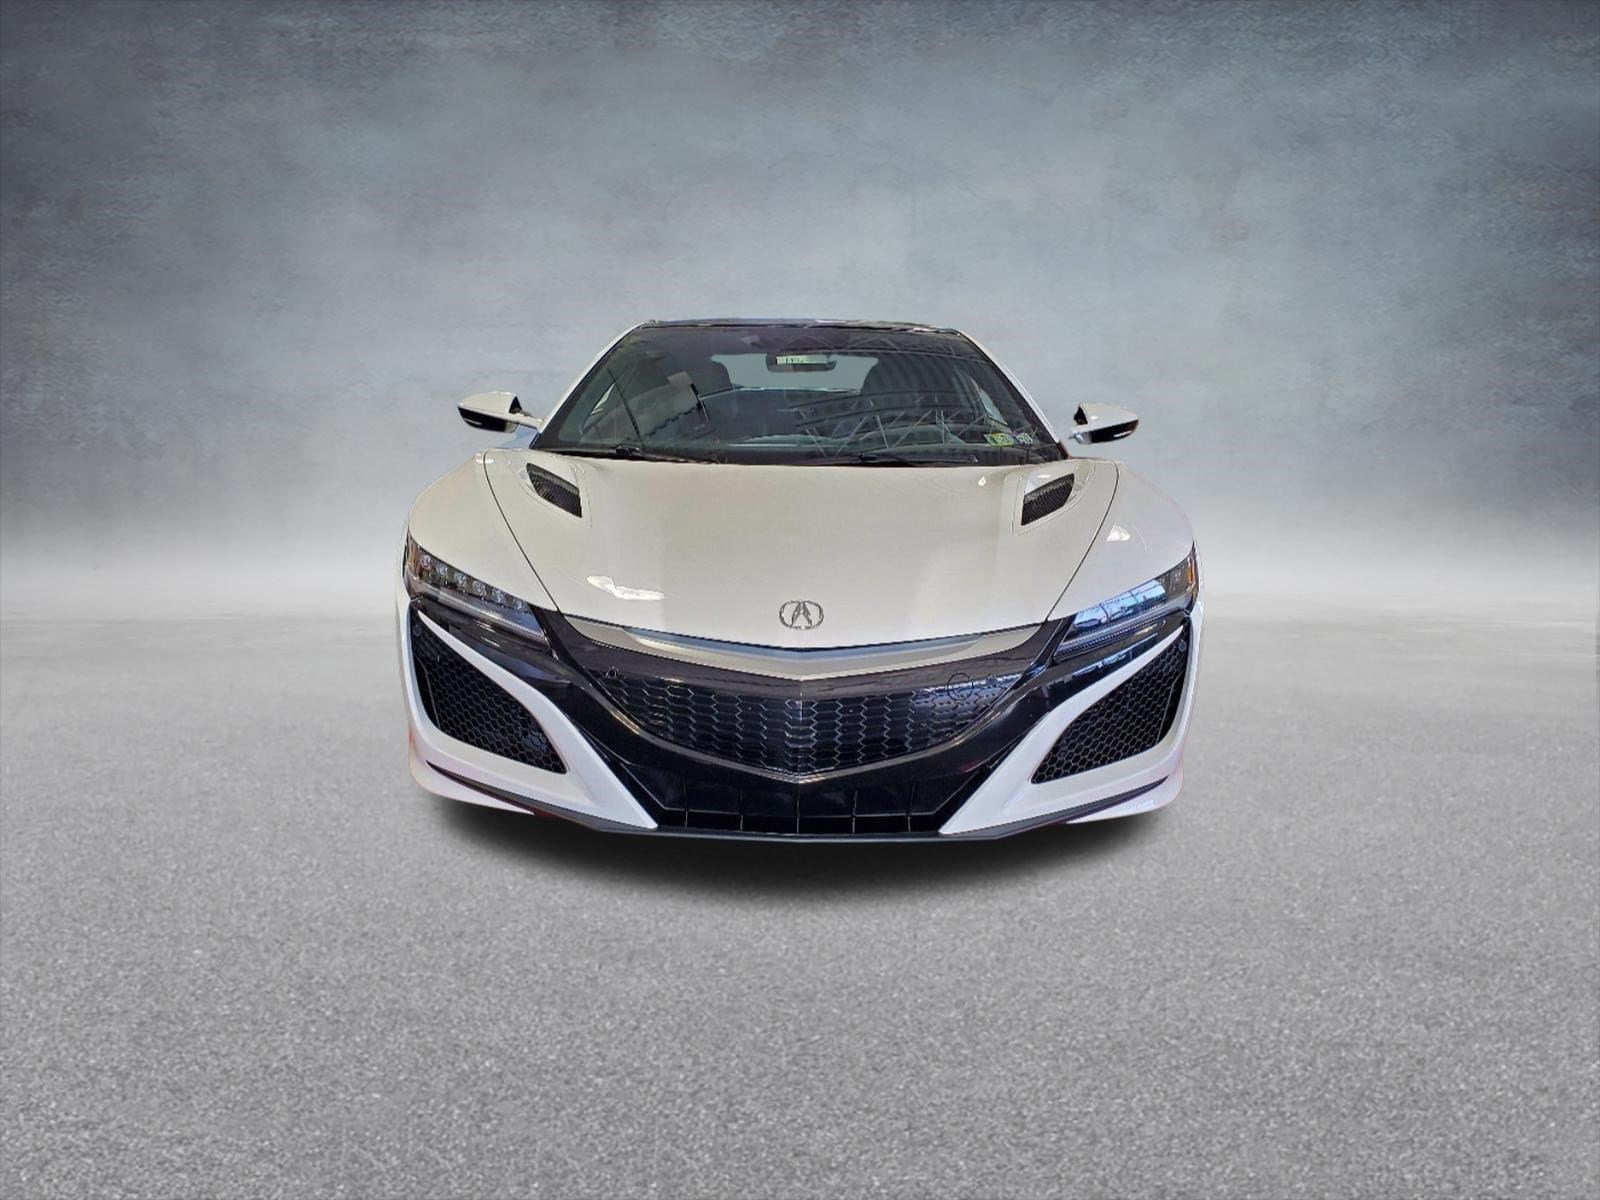 Used 2017 Acura NSX For Sale in West Chester PA | Near 